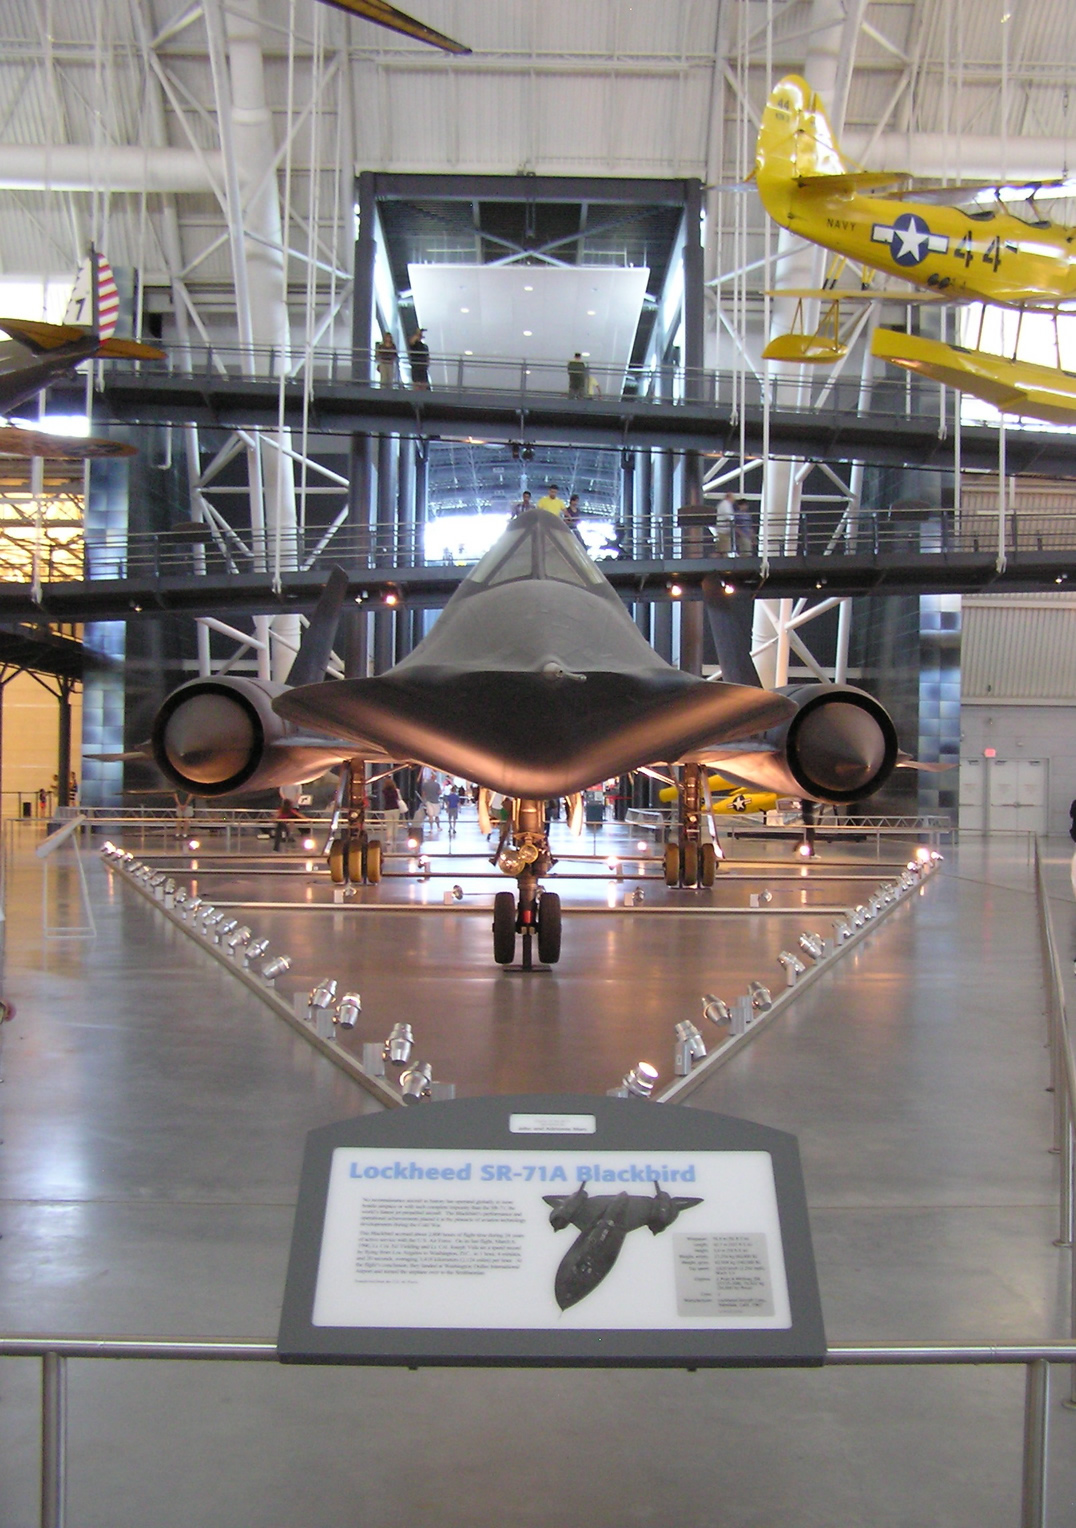 SR71 supersonic spy plane looks "saucer" like from the front